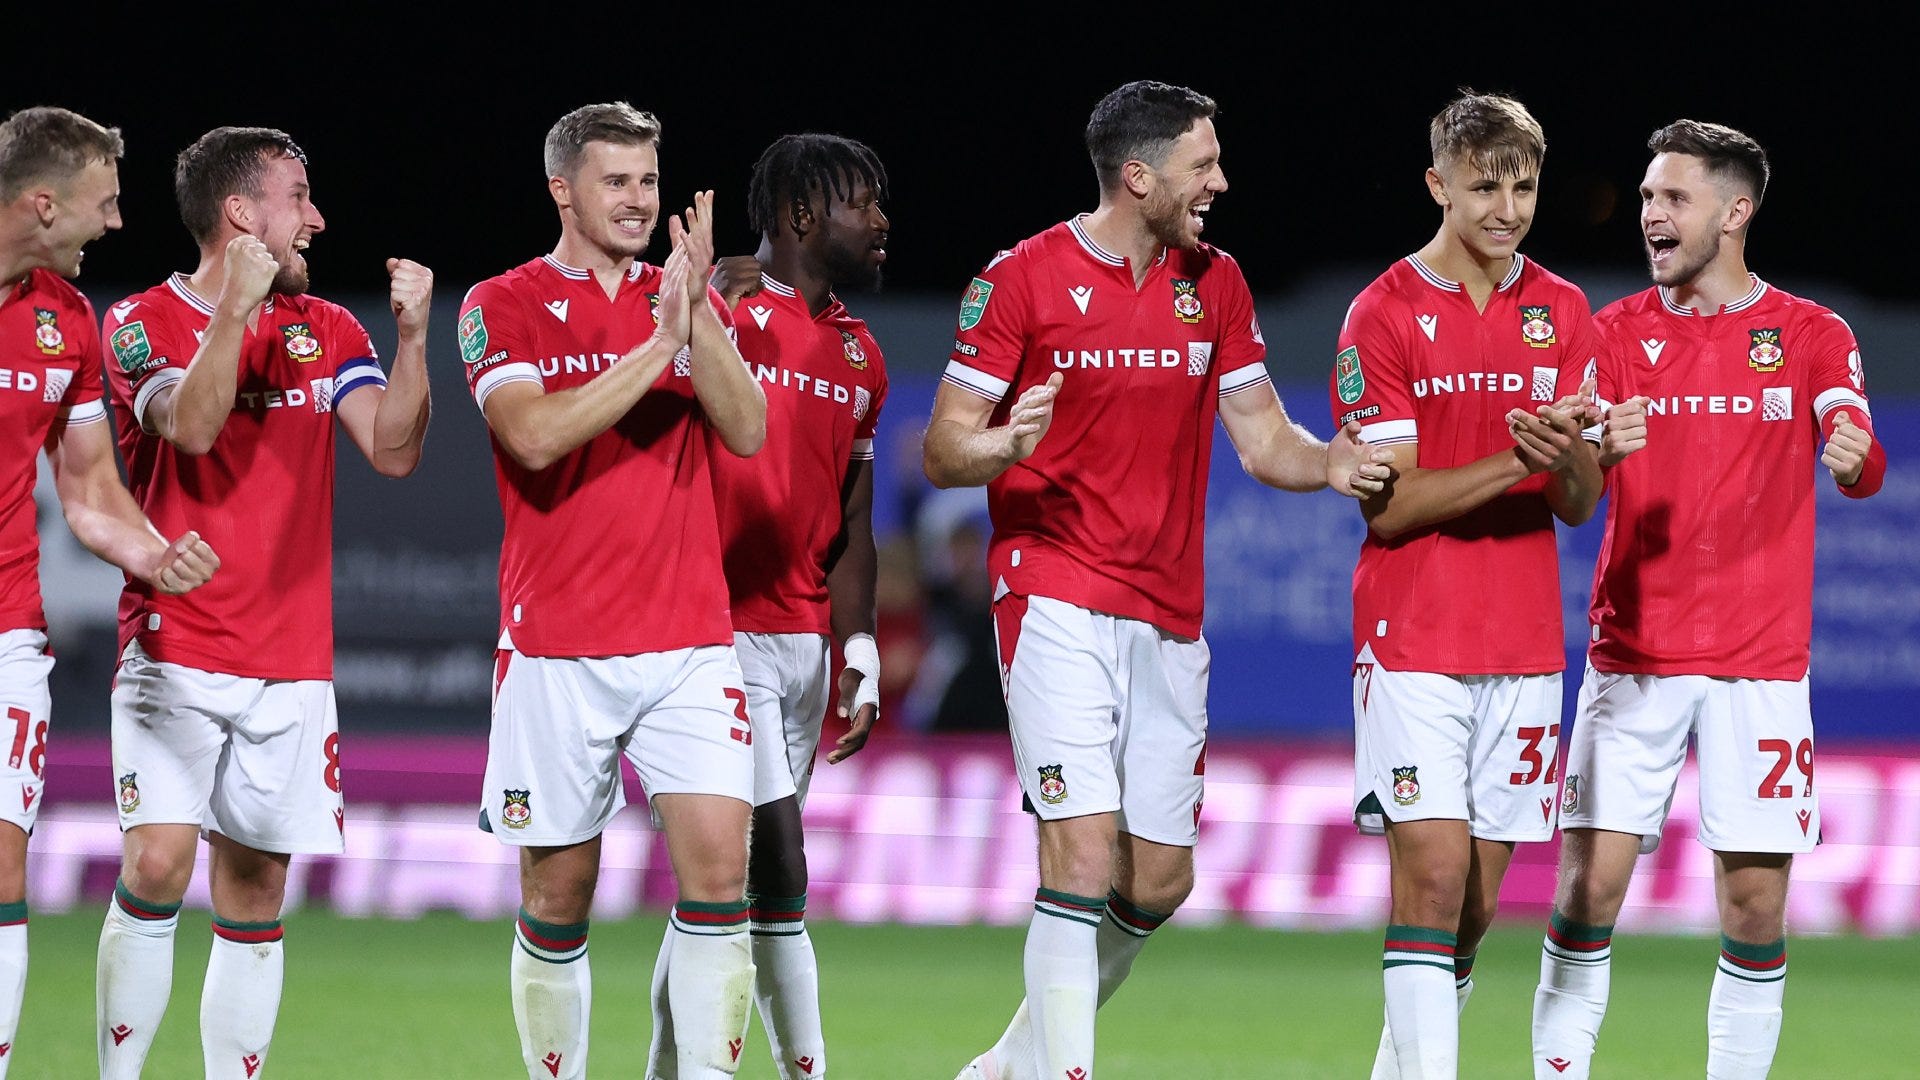 REDS PROGRESS WITH ROVERS VICTORY - News - Barnsley Football Club